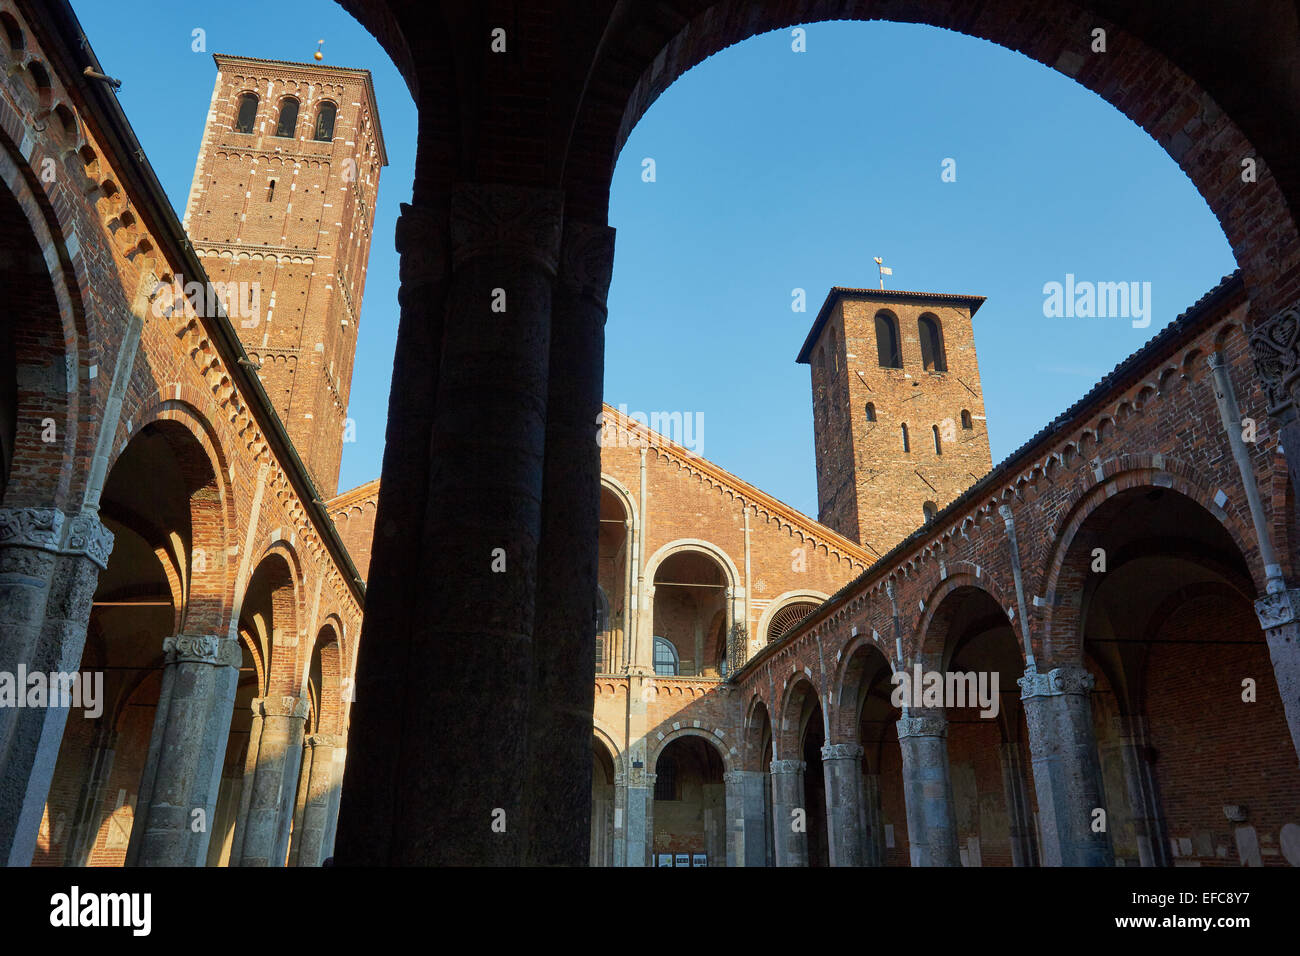 Arched courtyard entrance and two bell towers of Sant'Ambrogio church Milan Lombardy Italy Europe Stock Photo